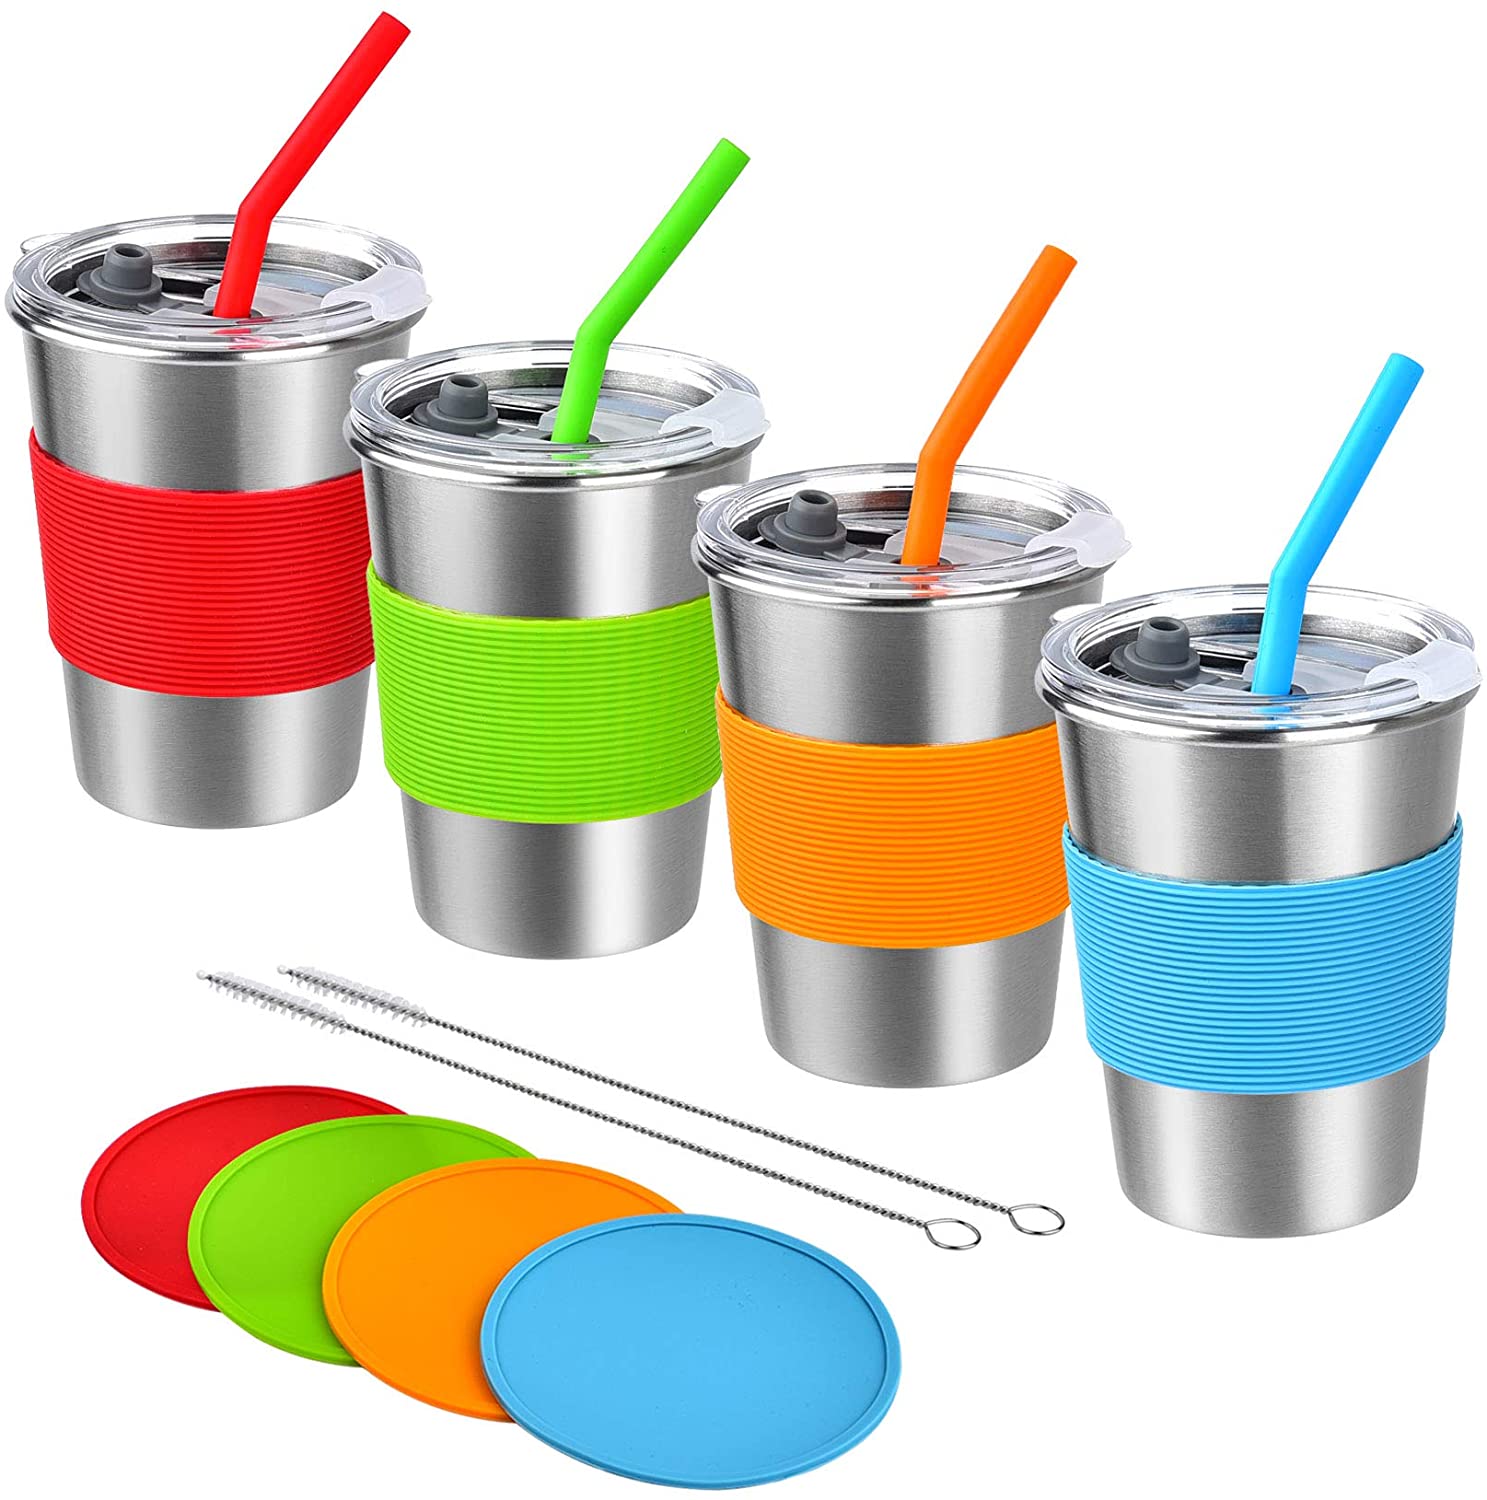 Metal　Drinking　Kids　and　Tumbler　Steel　Pack　Proof,4　Straw　Cups　Mug　Lid　Water　with　Spill　for　with　Glasses,BPA-Free　12oz　Stainless　Toddler,Children,Adult,　Coasters,Unbreakable　Sippy　Indoor,Outdoor